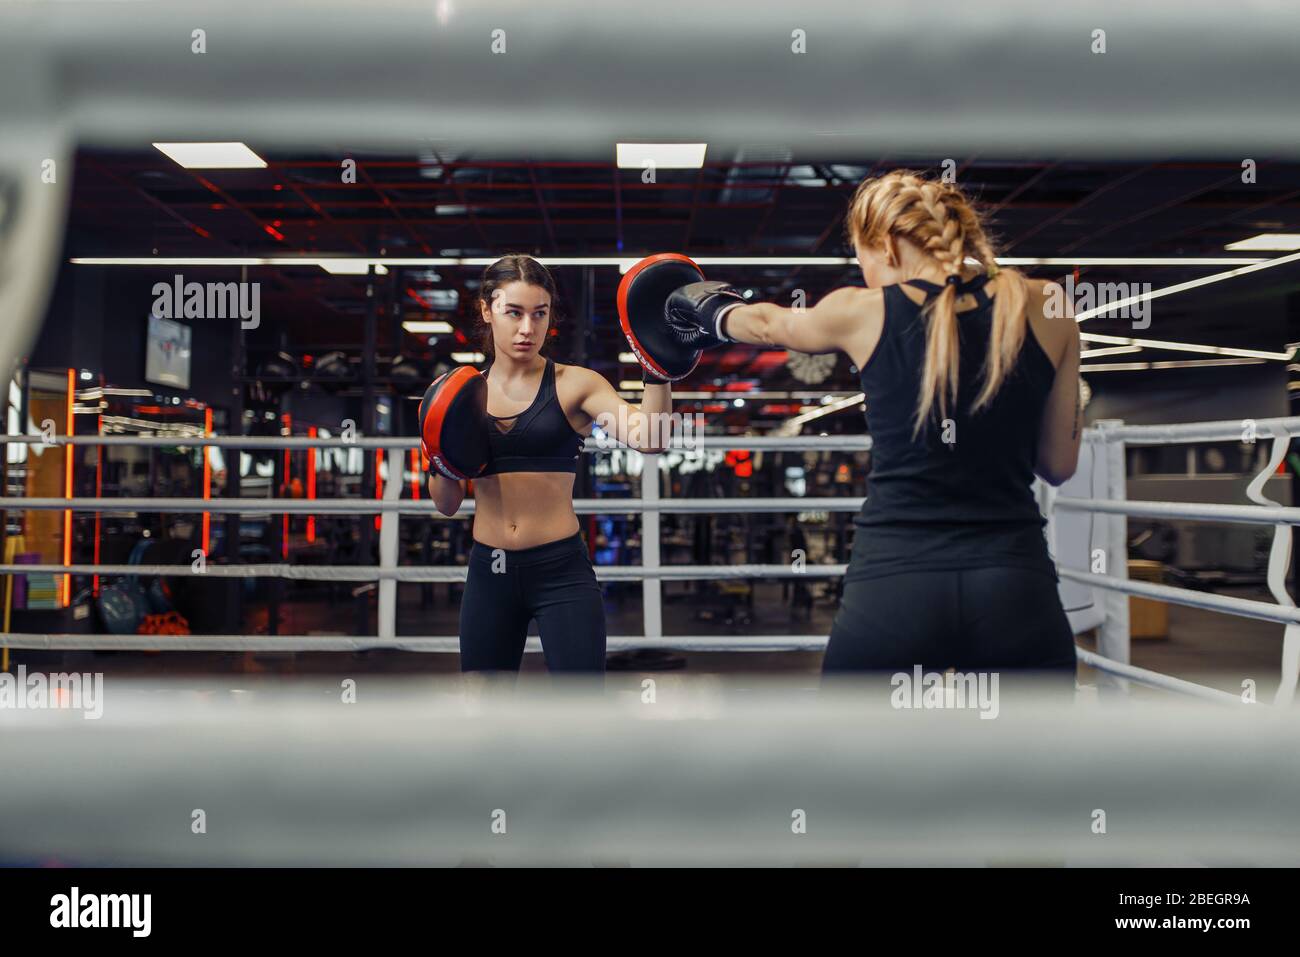 Two women boxing on the ring, box workout Stock Photo